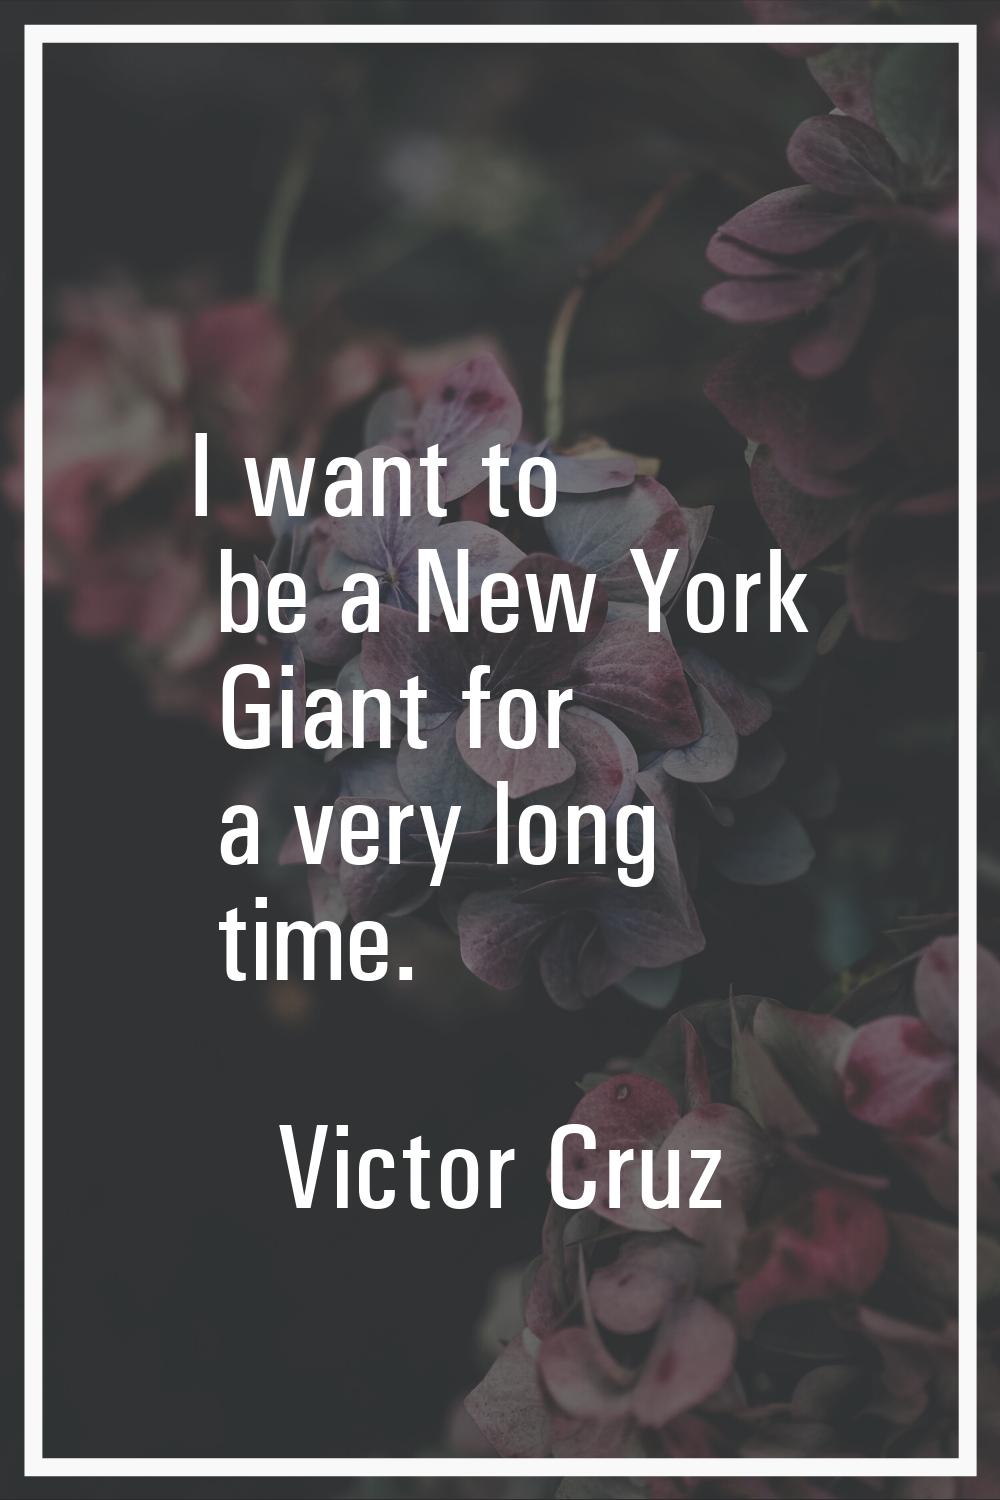 I want to be a New York Giant for a very long time.